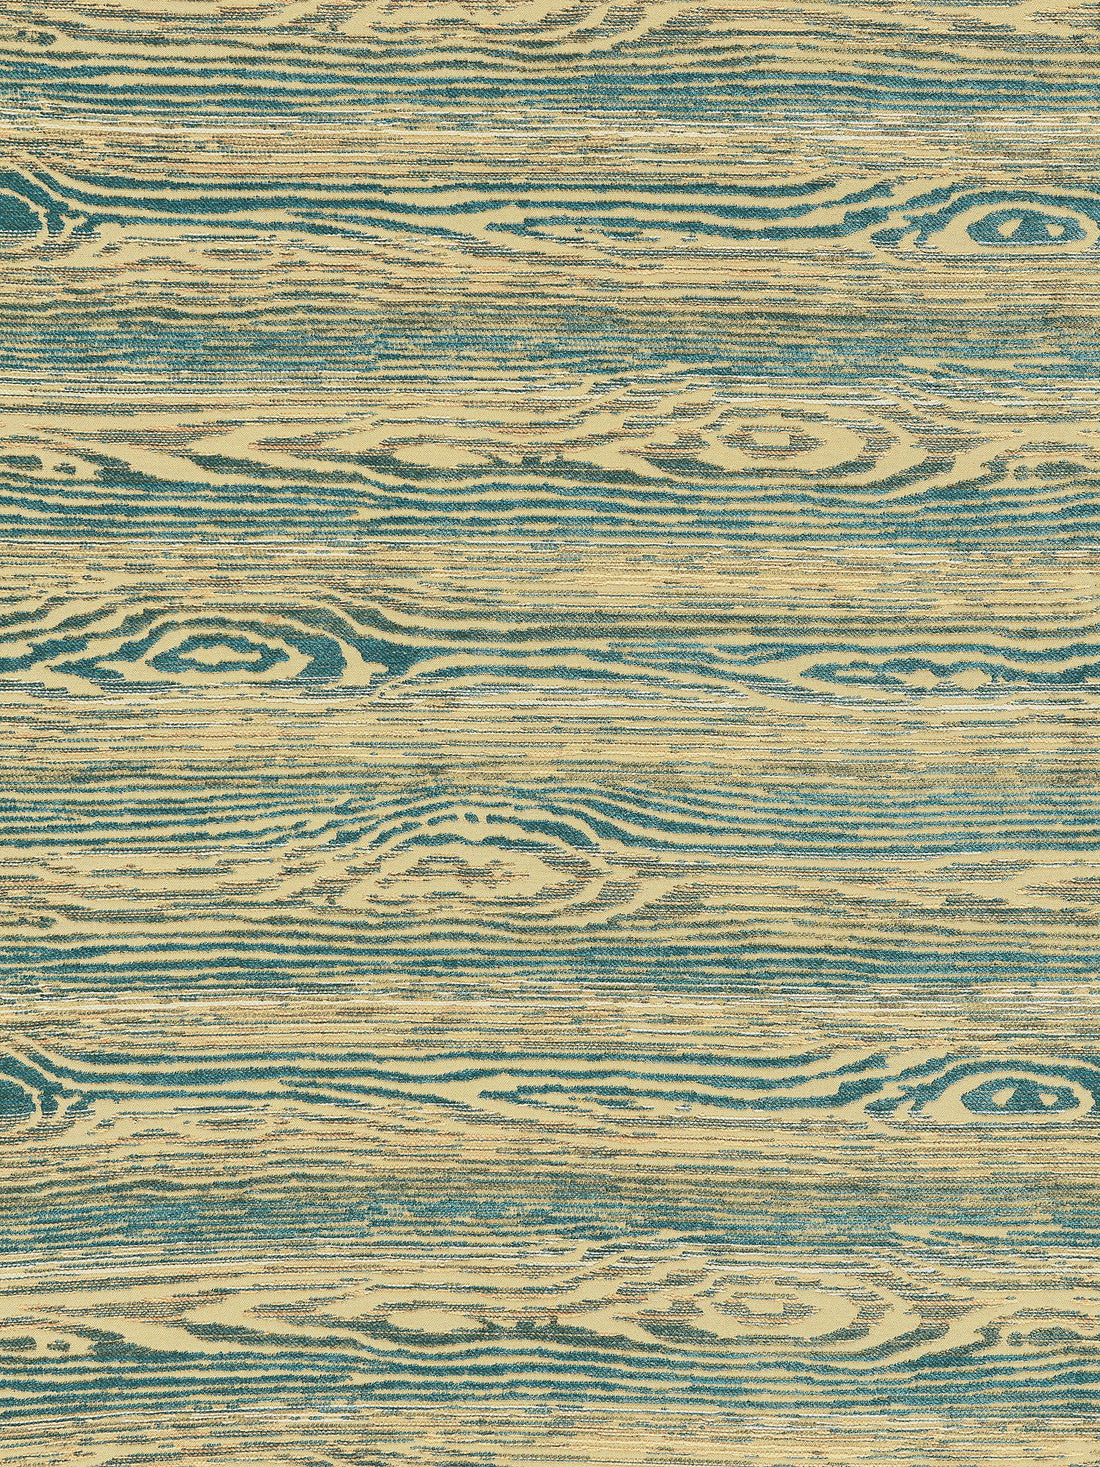 Muir Woods fabric in blue jay color - pattern number CD 0003OB41 - by Scalamandre in the Old World Weavers collection